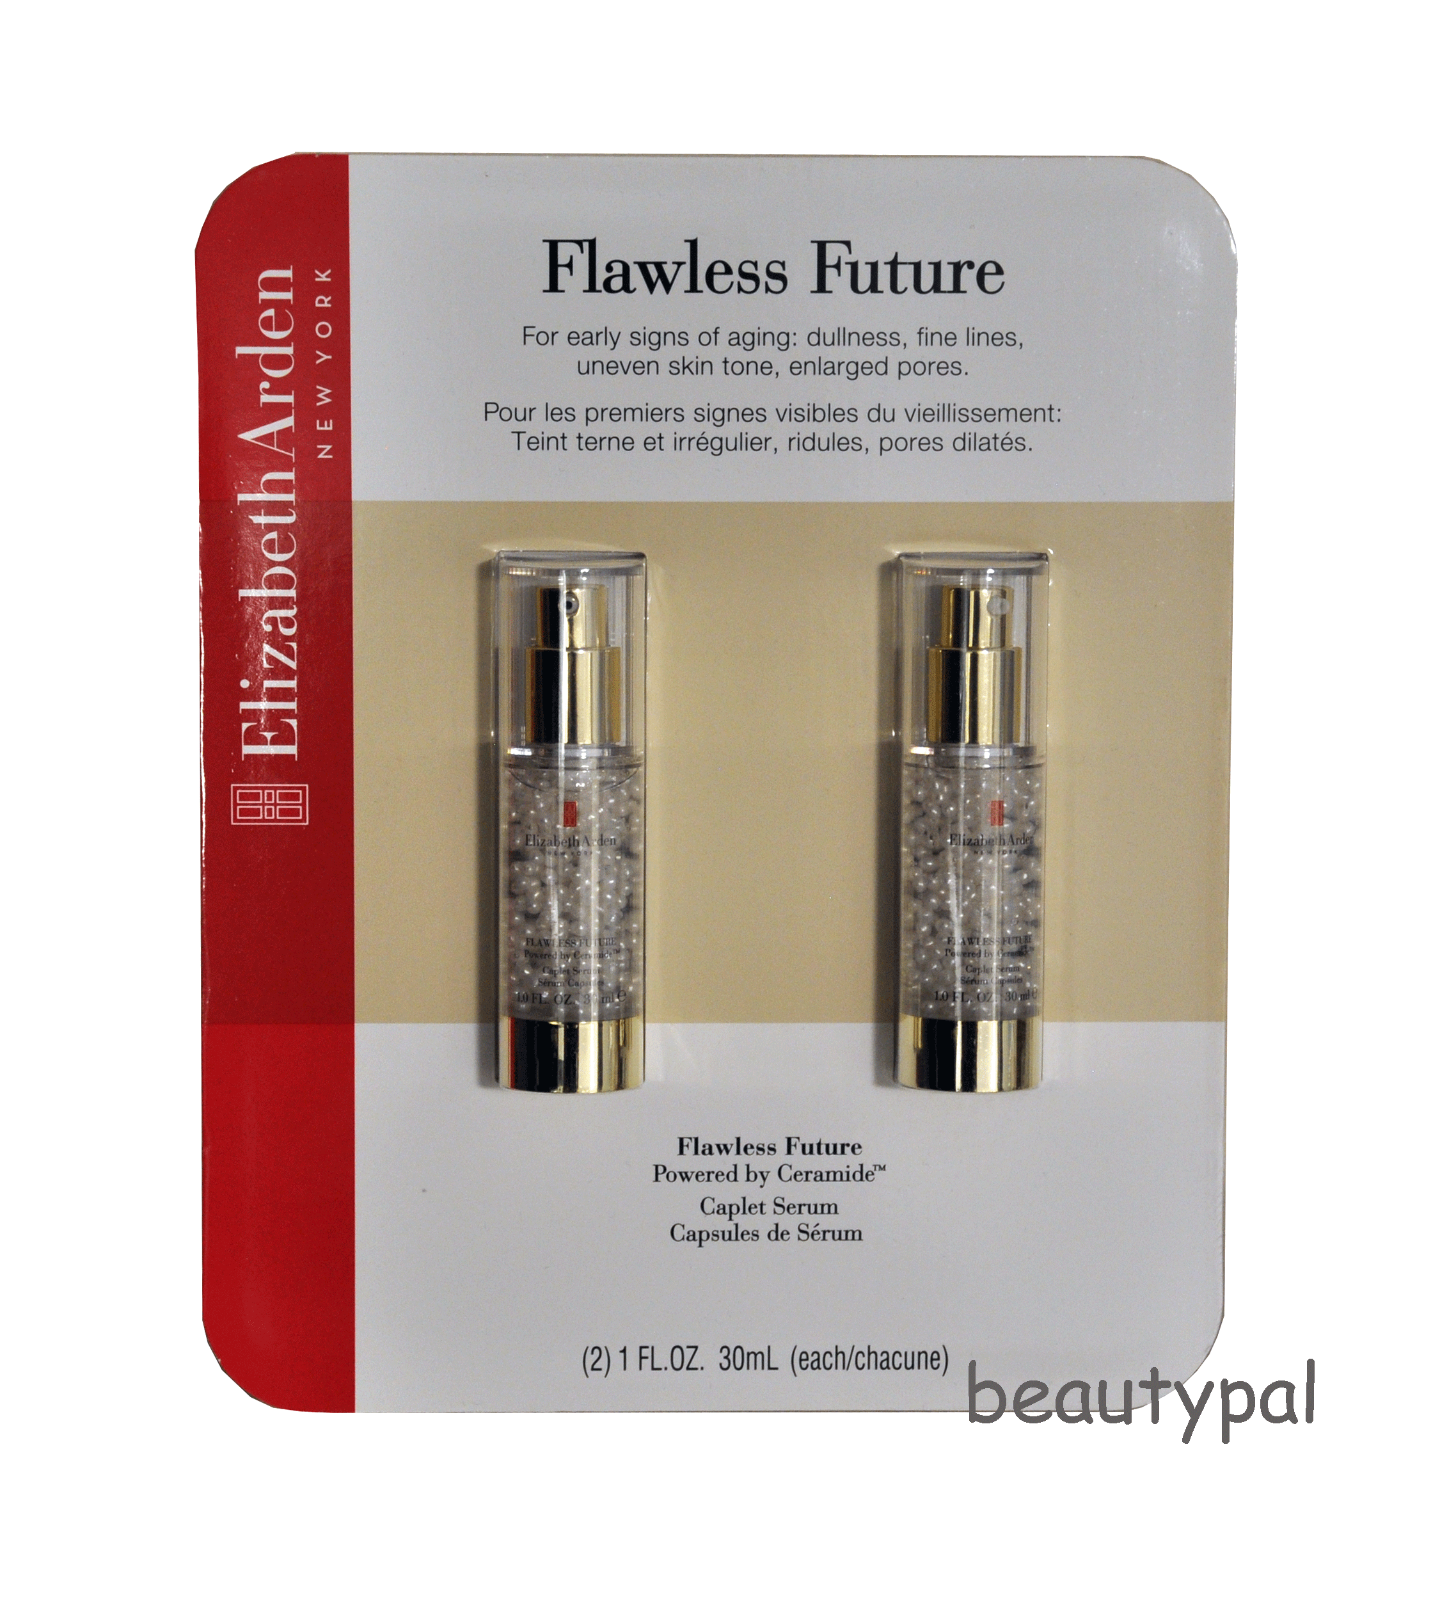 Primary image for Elizabeth Arden Flawless Future Caplet Serum (1.0 OZ x 2) - DOUBLE VALUE PACK